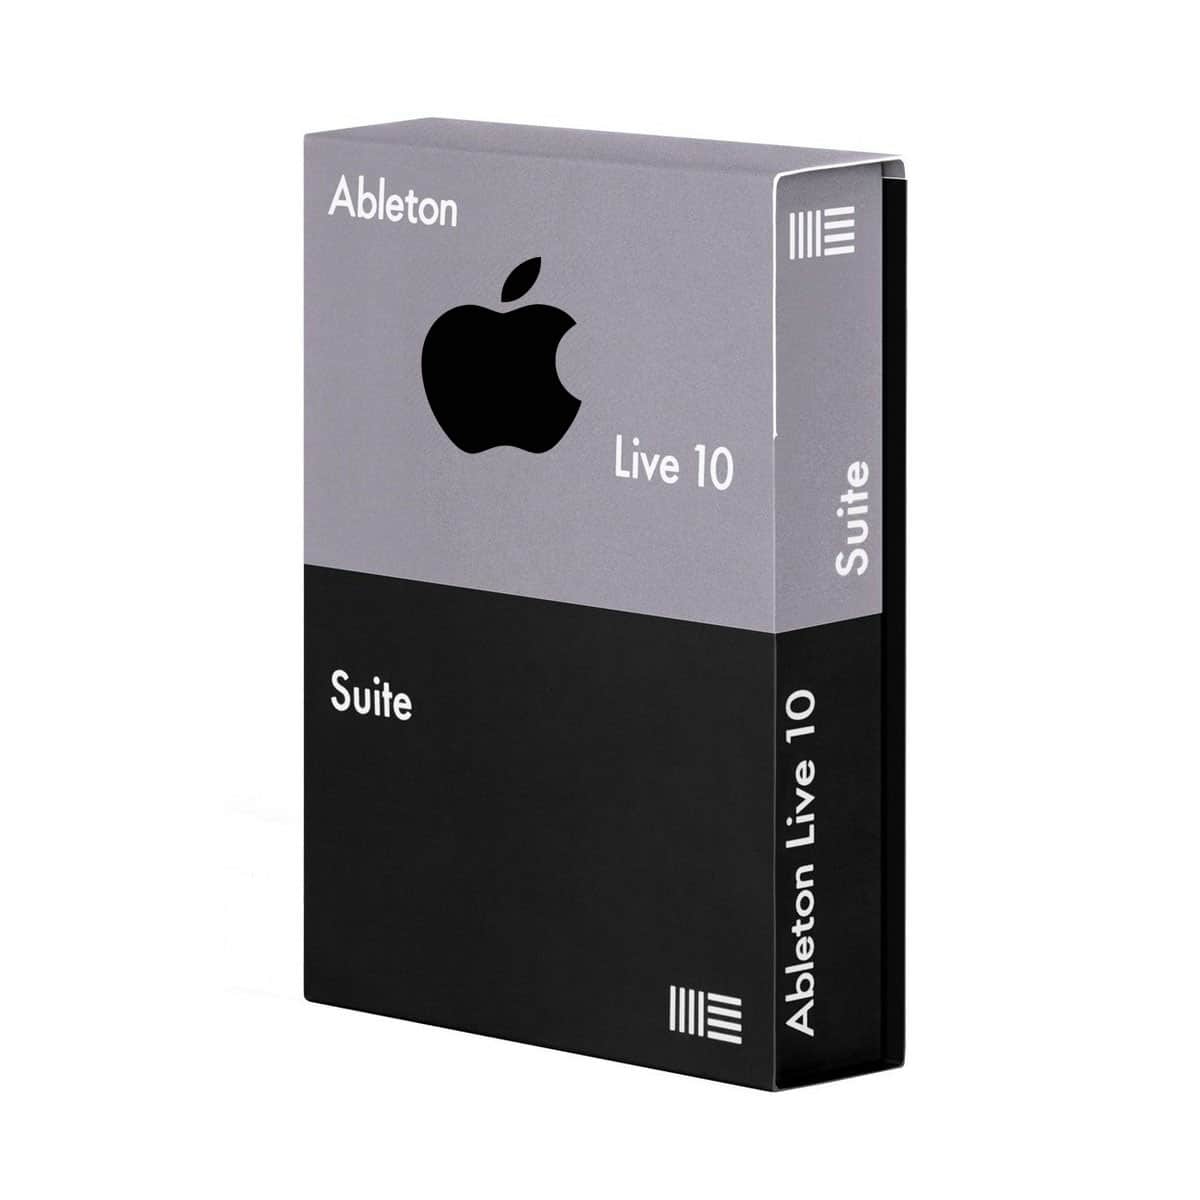 How To Completely Uninstall Ableton Live 10 Mac